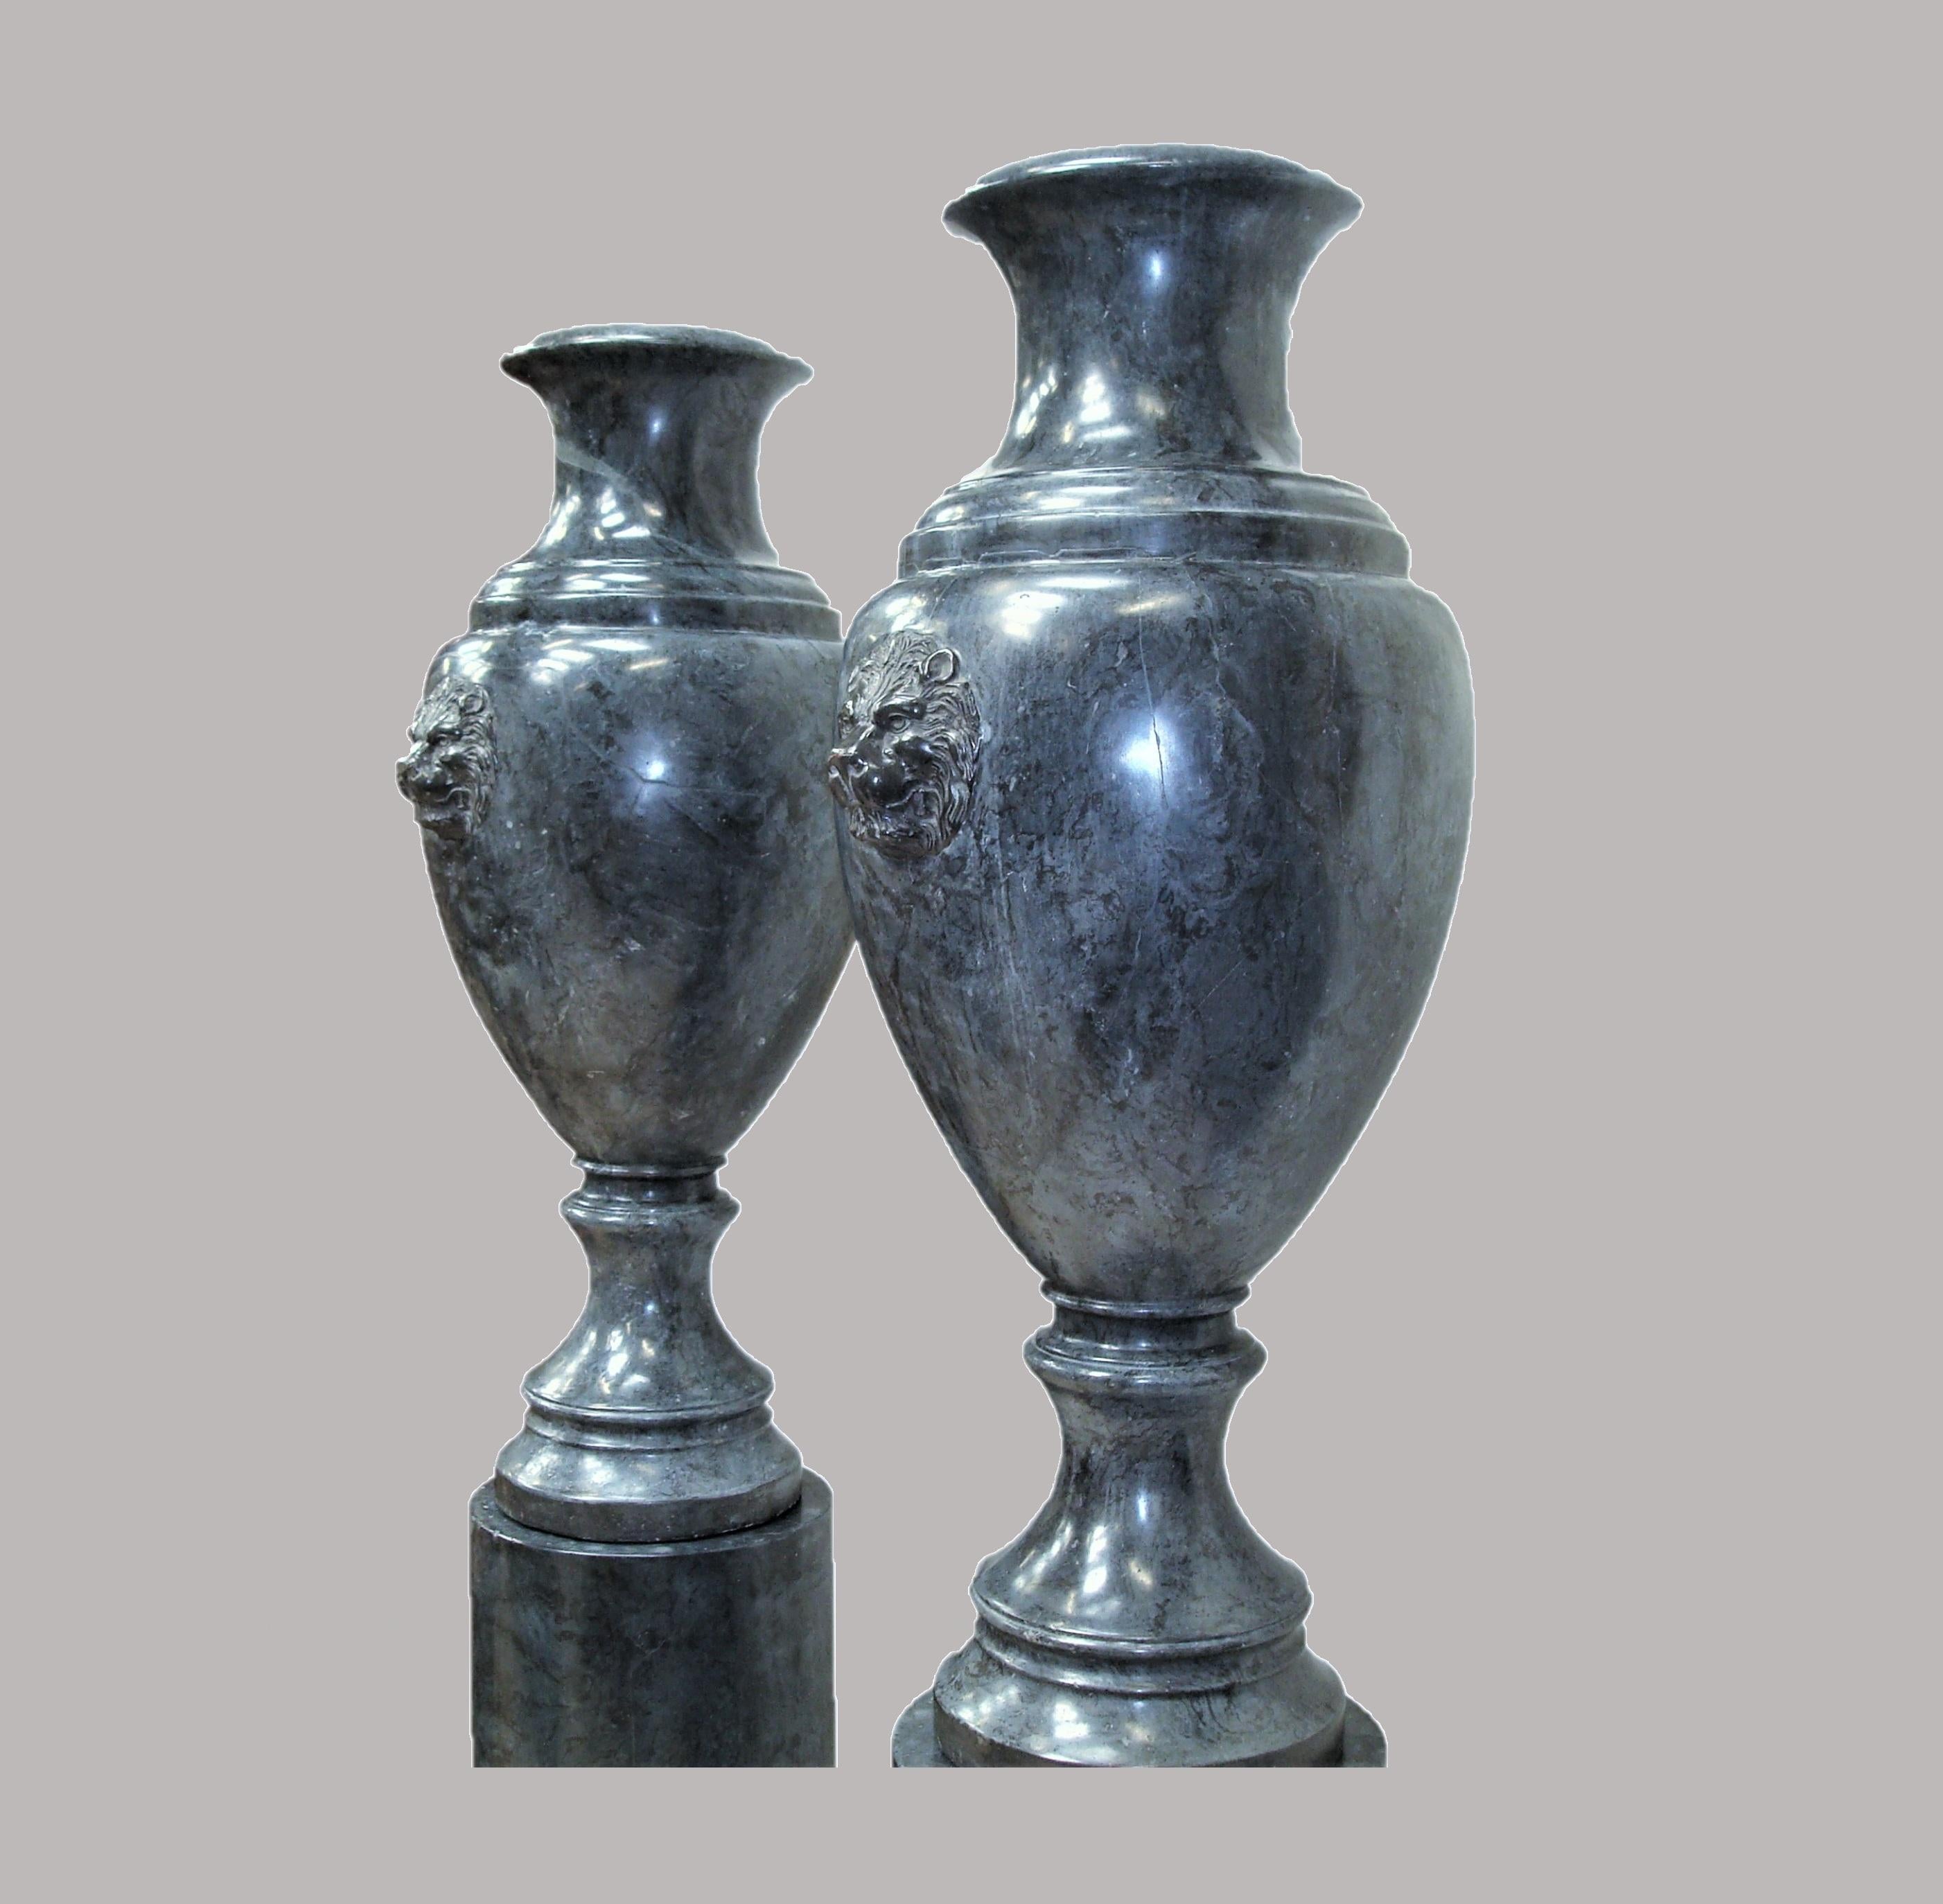 Neoclassical Early 20th Century Pair of Scagliola Urns on Pedestals For Sale